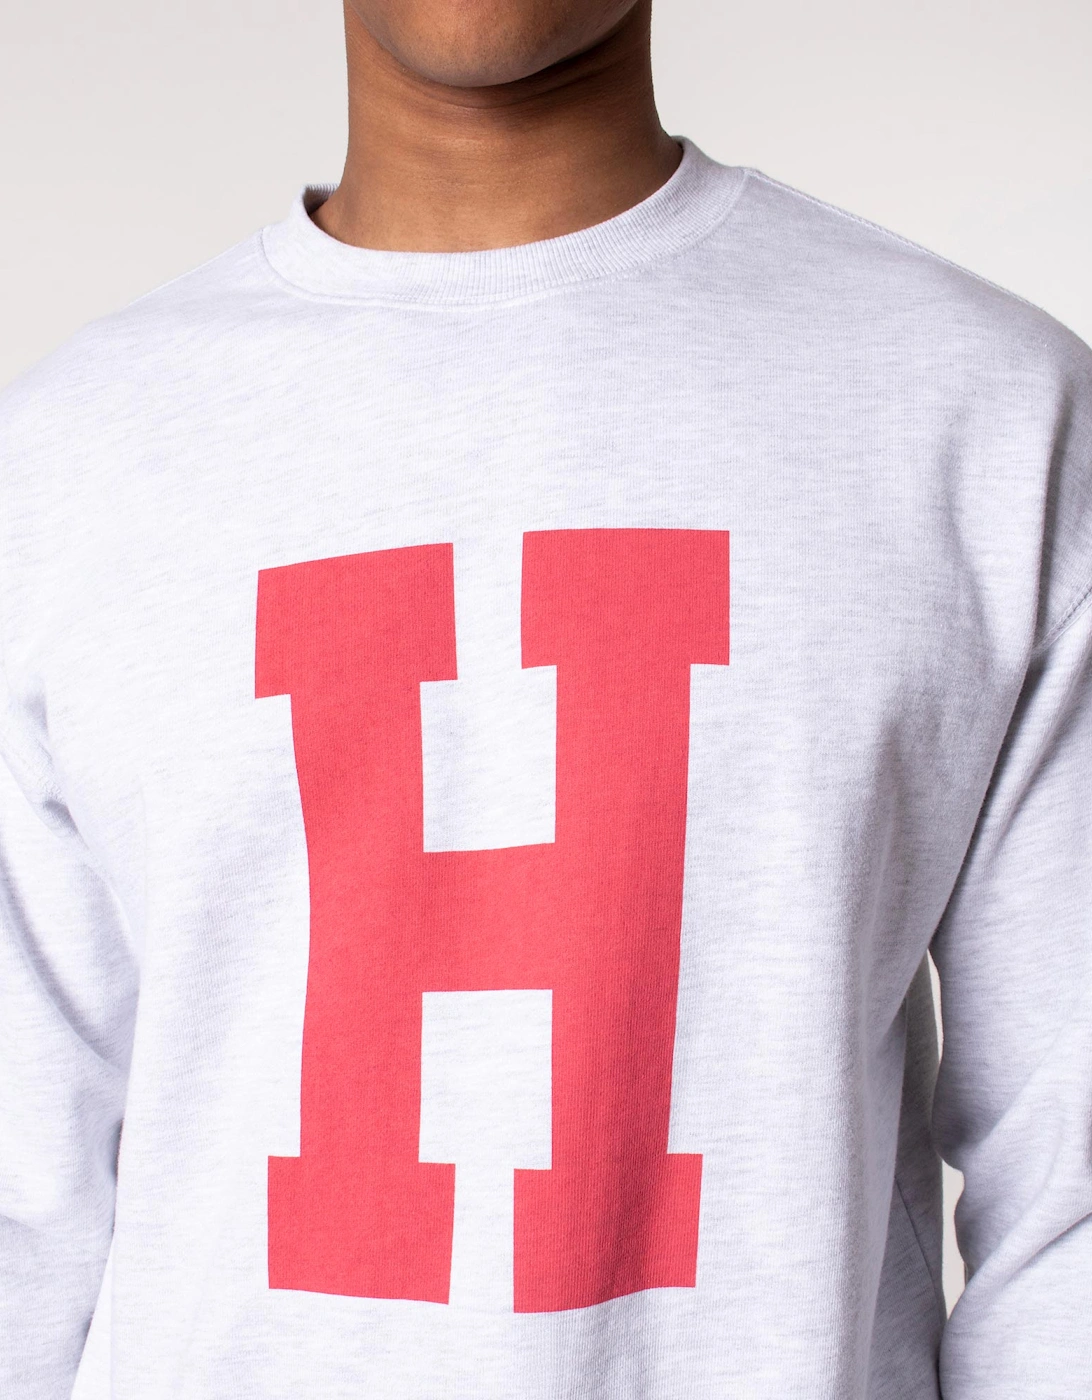 Relaxed Fit H Vintage Sweatshirt